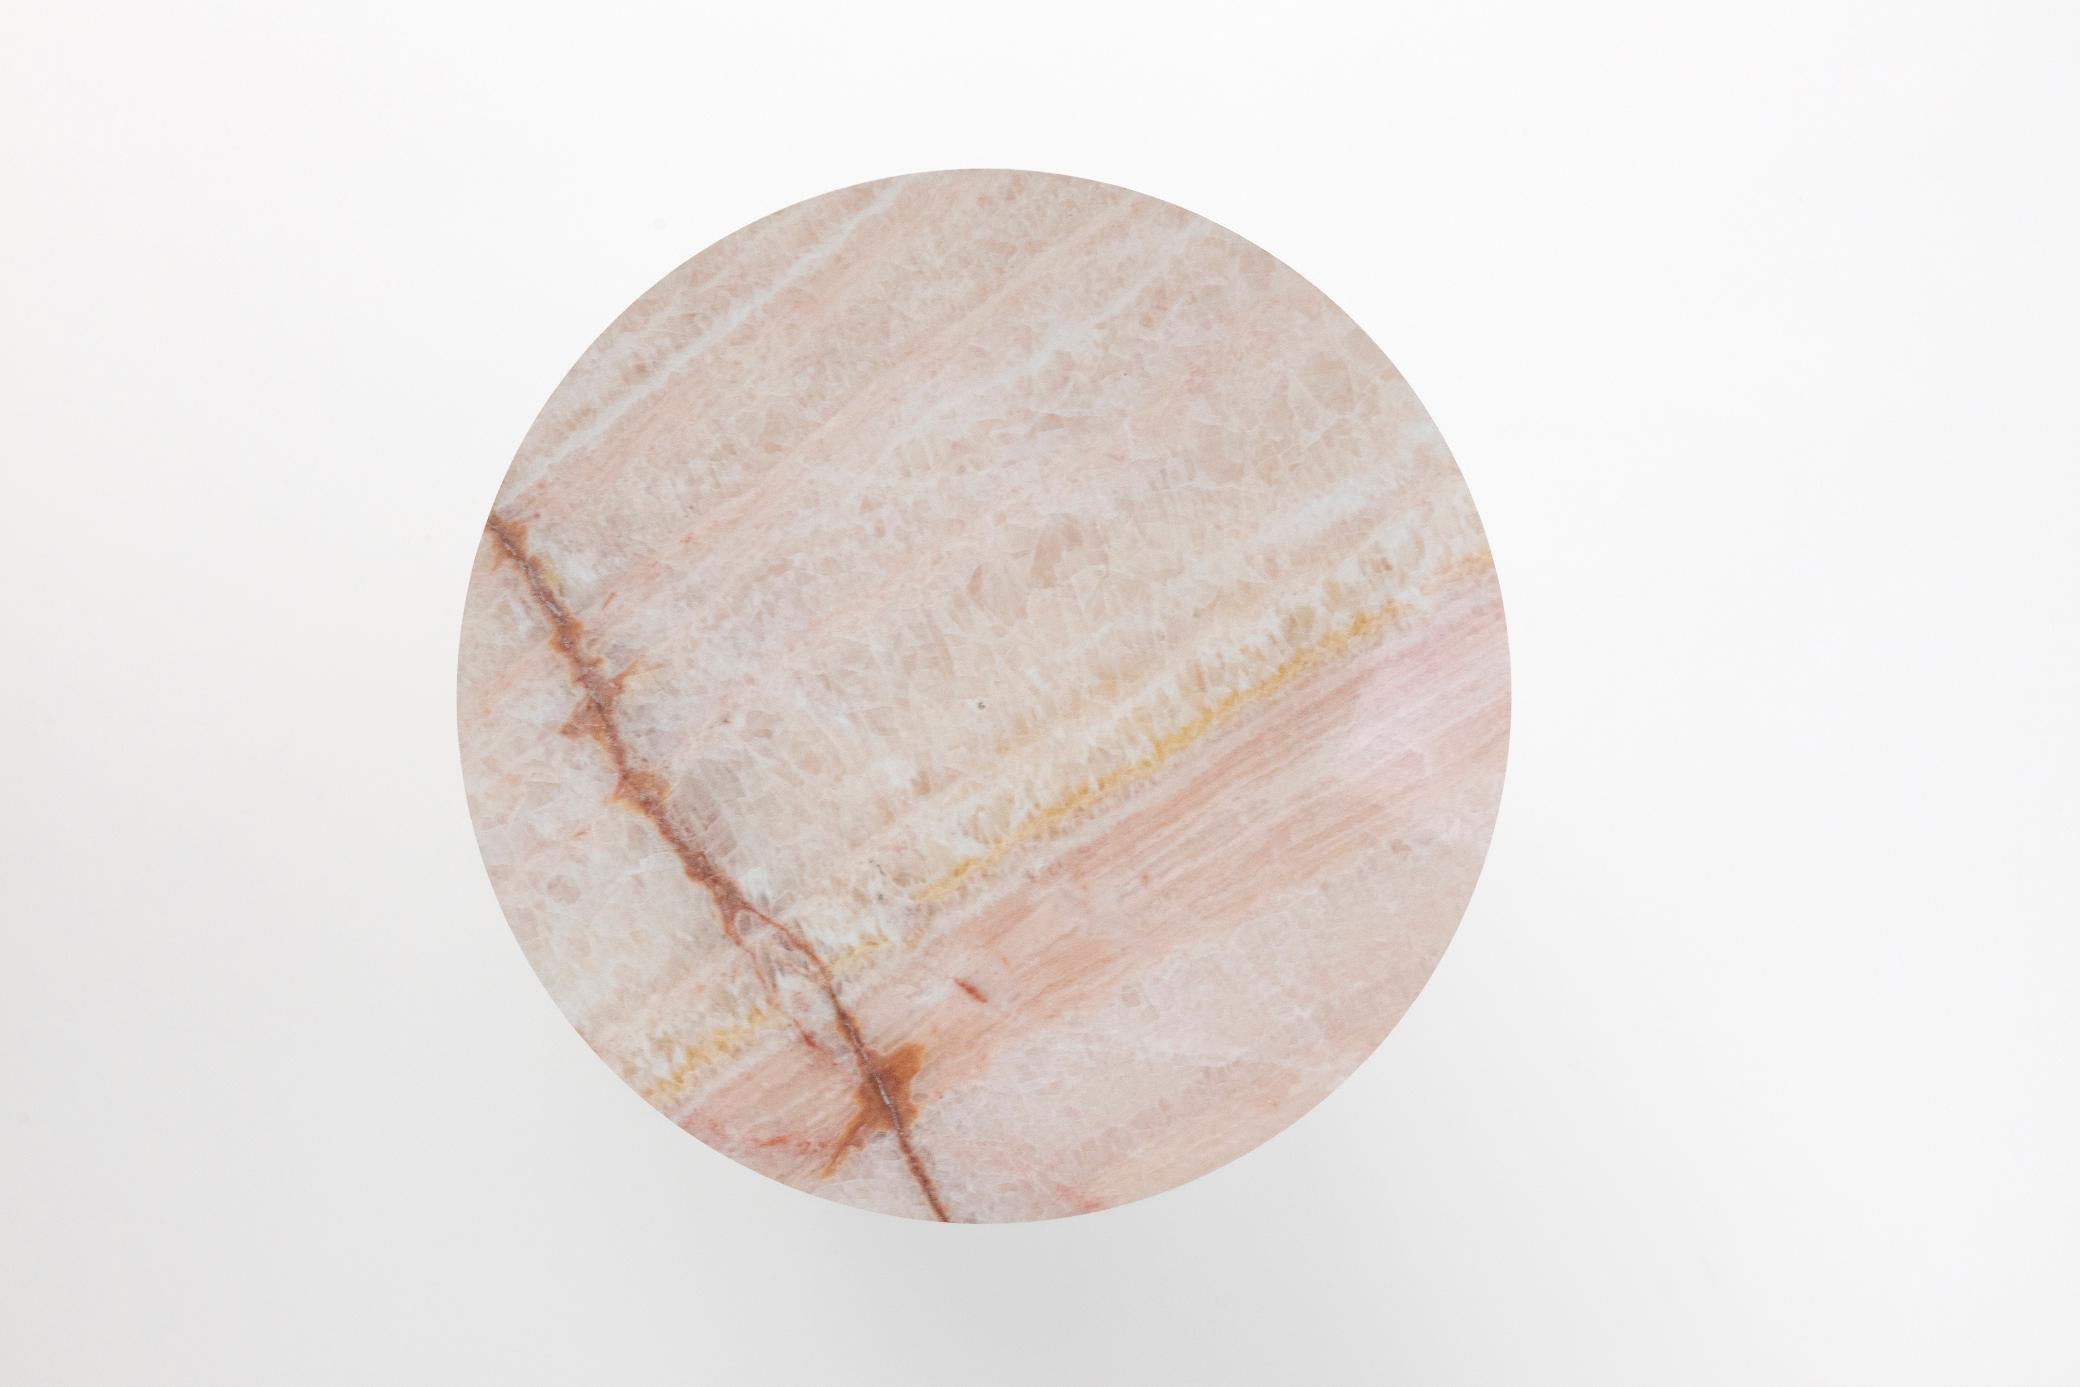 Materials: Golden Calacatta marble and pink onyx
Indoors and outdoors
Side table / Stool

While, in principle, marble bears not a volcanic origin, the veiny, fine-grained Yule marble employed for this variation of Sten Studio’s distinctive stools is